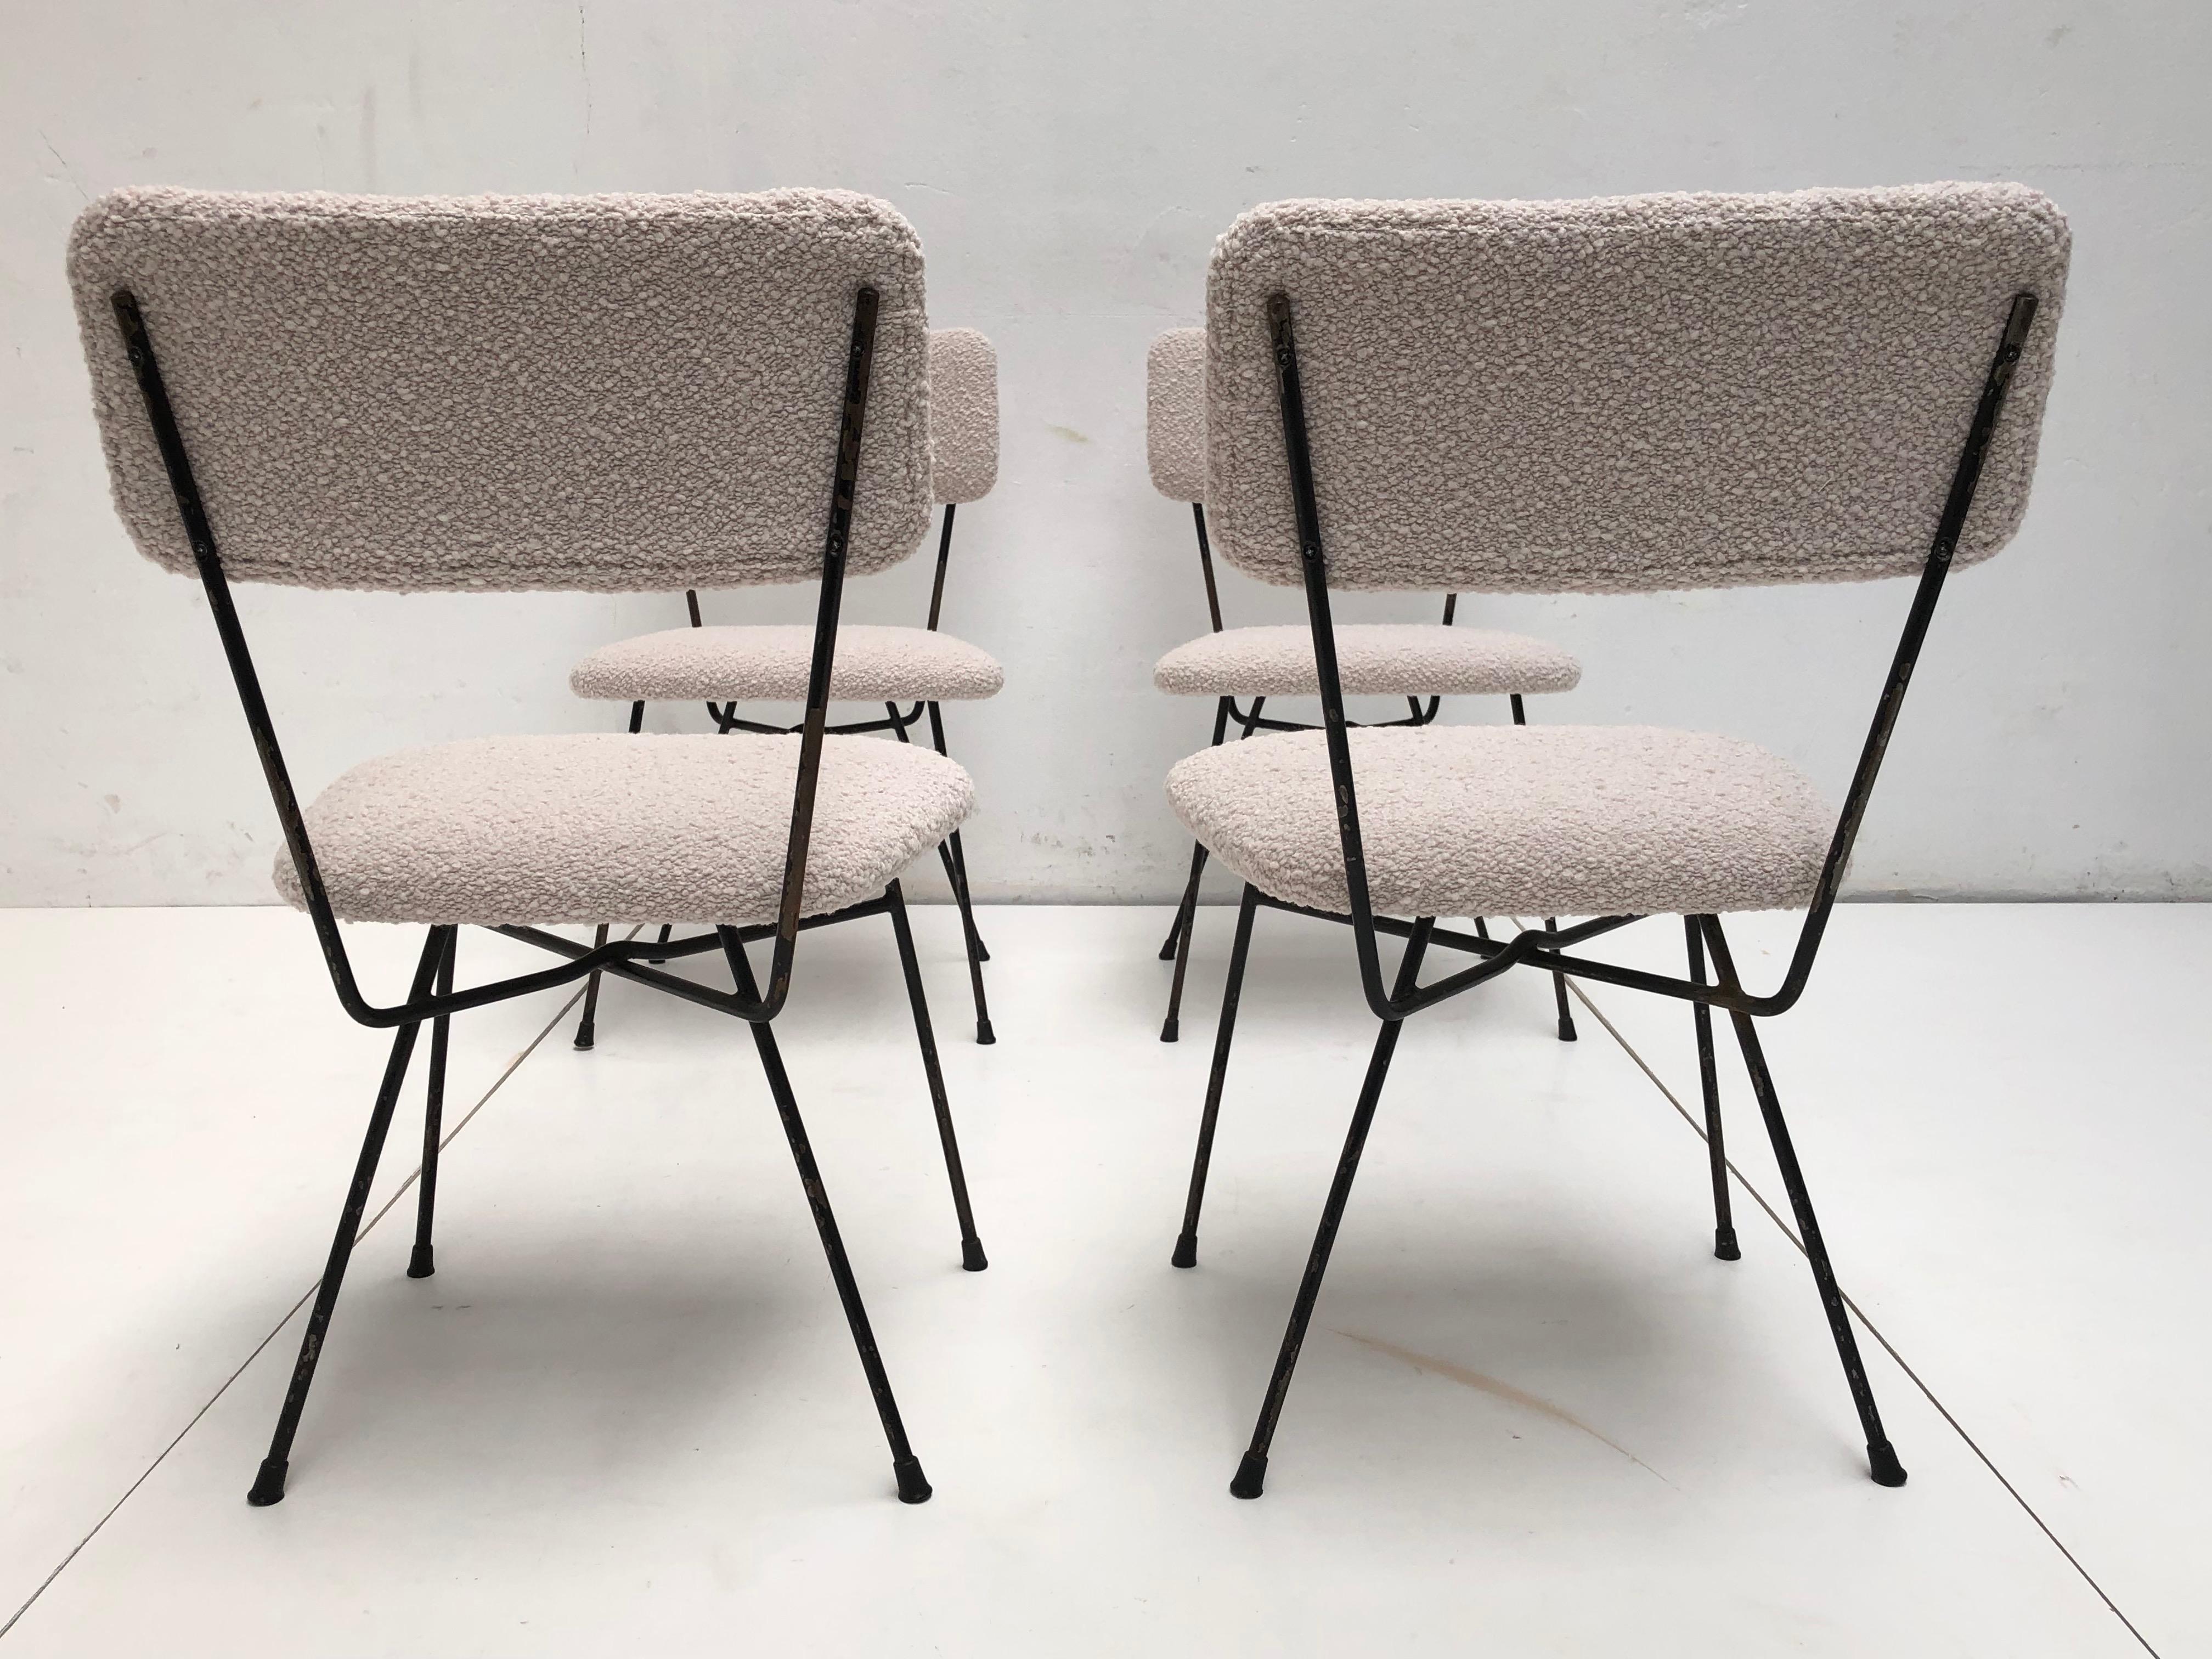 Steel 4 Dining Chairs by Pizzetti Rome Italy 1950s, New Wool Boucle Upholstery For Sale